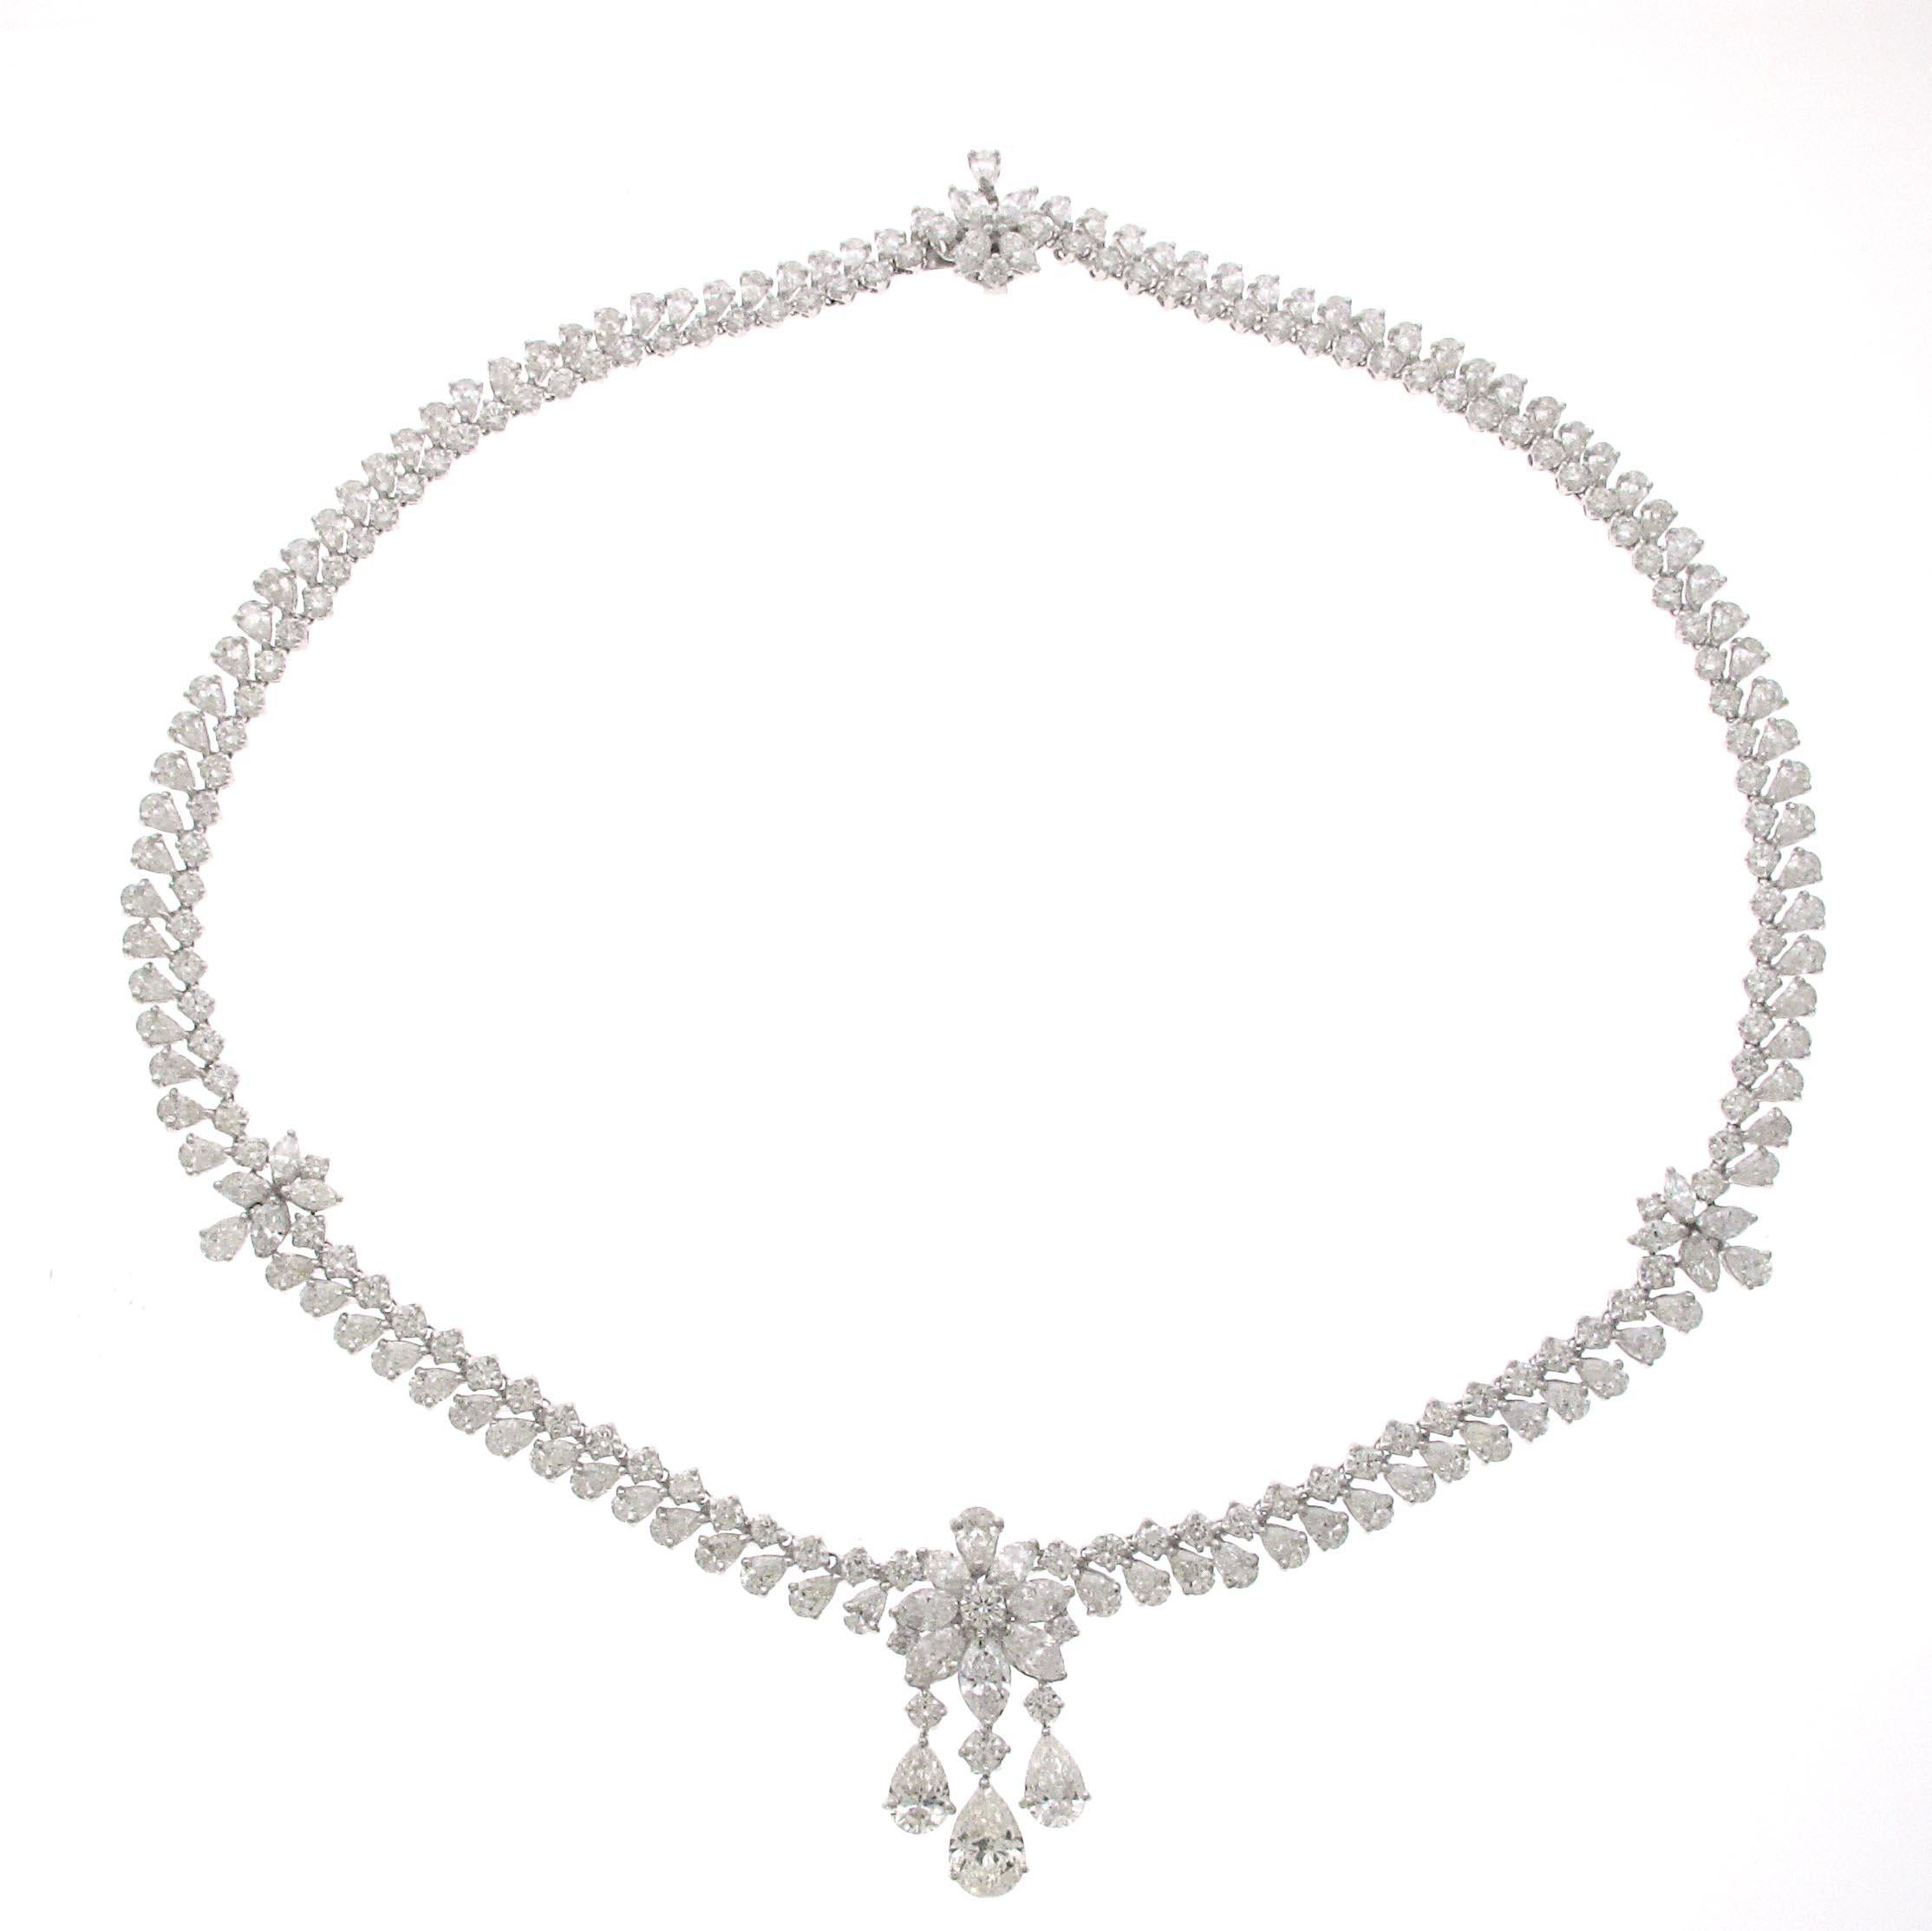 Fantastic piece to wear to that big event you have. This platinum and diamond necklace has 238 diamonds throughout weighing a total of 36.78 carats. These are all bright white and clean diamonds. The piece de resistance are the pear shapes hanging